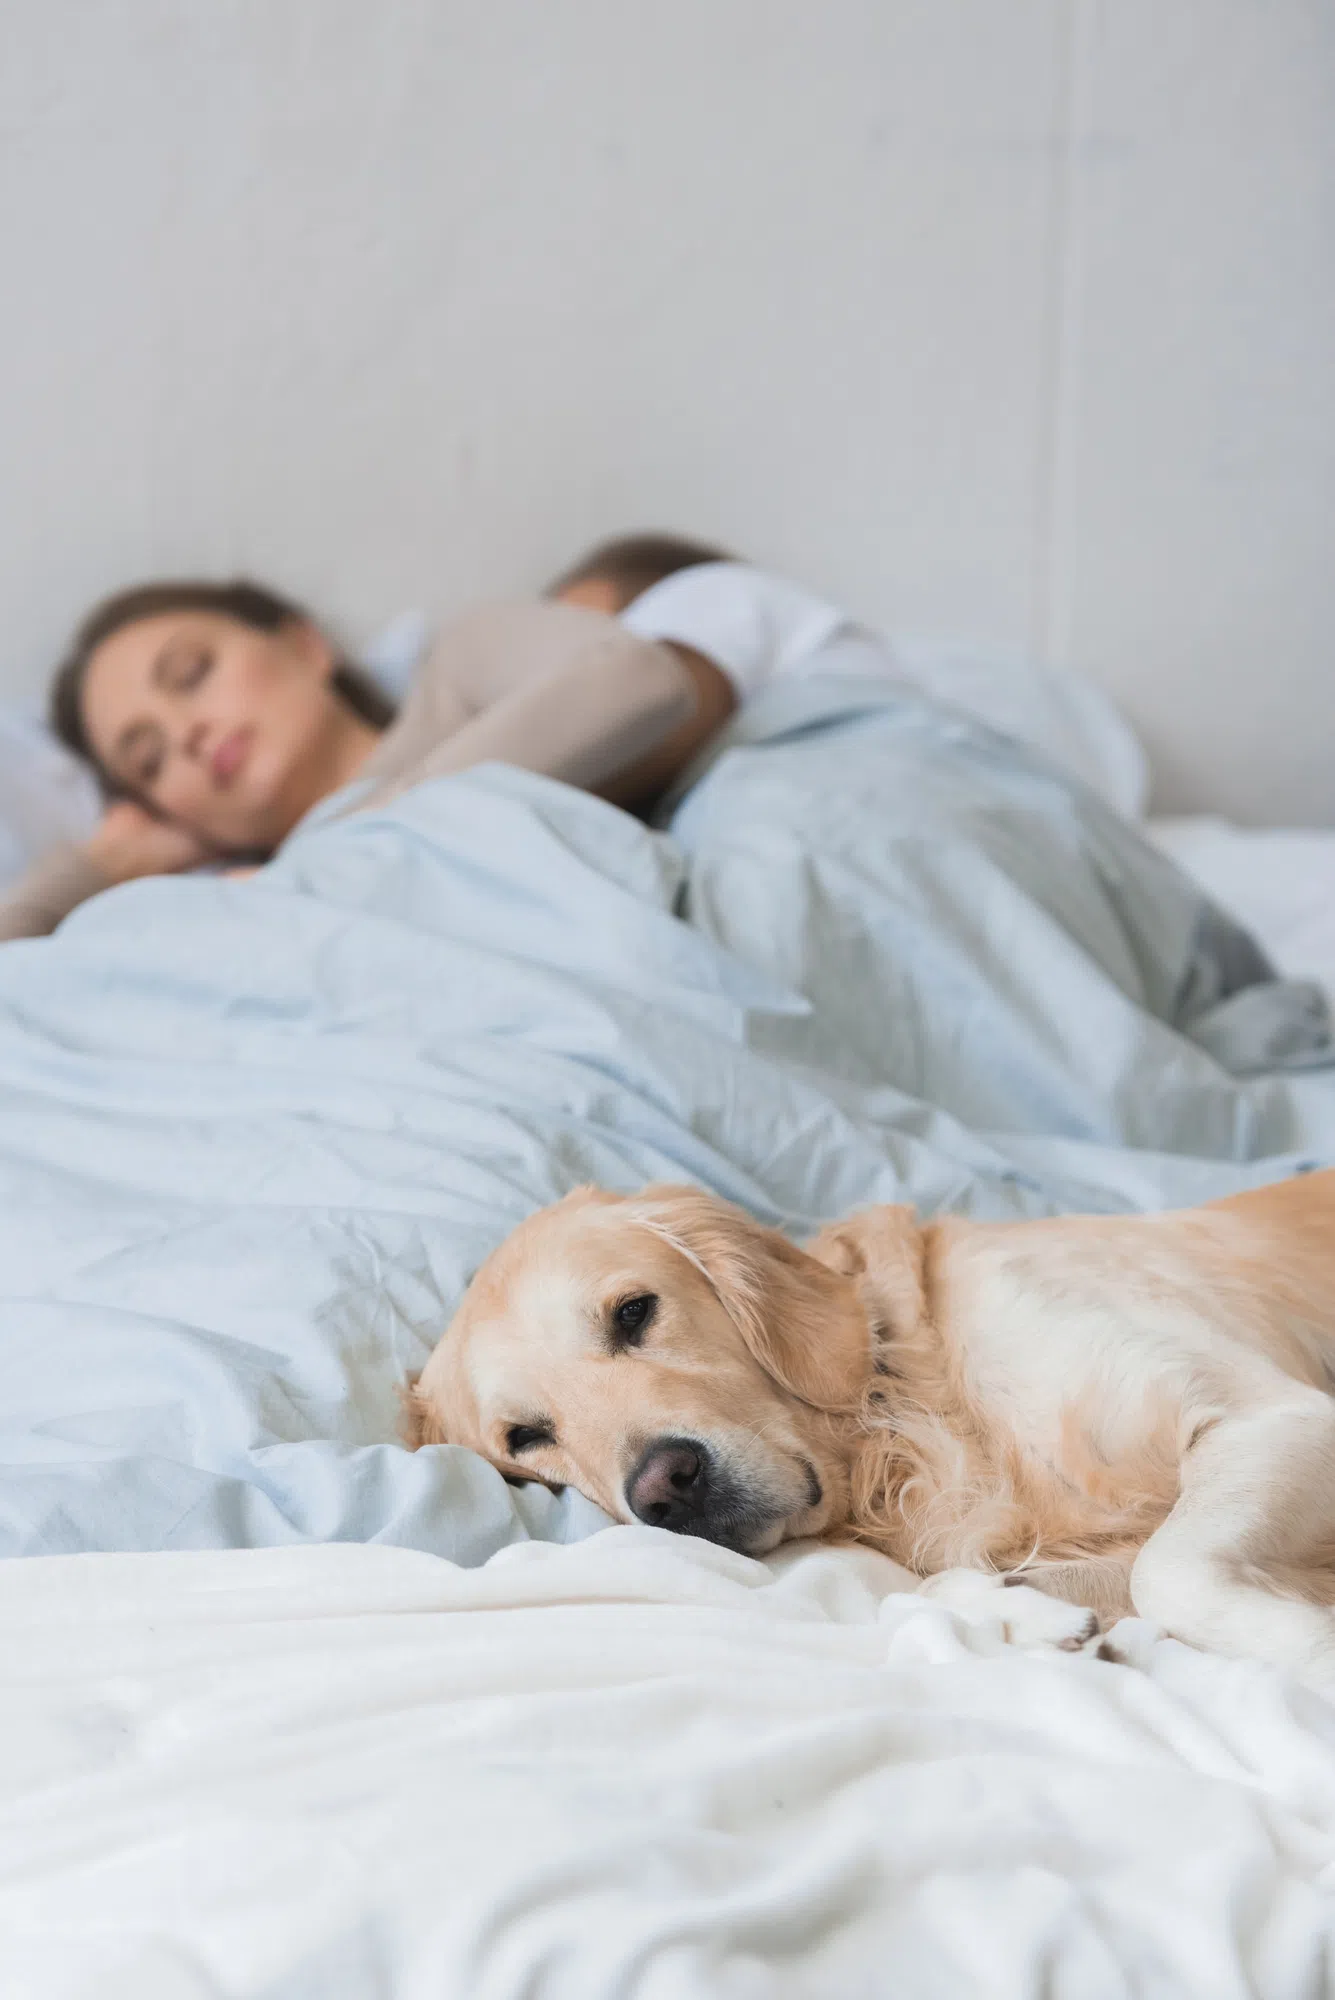 Some Women Prefer To Share The Bed With Partners of The Four Legged Kind